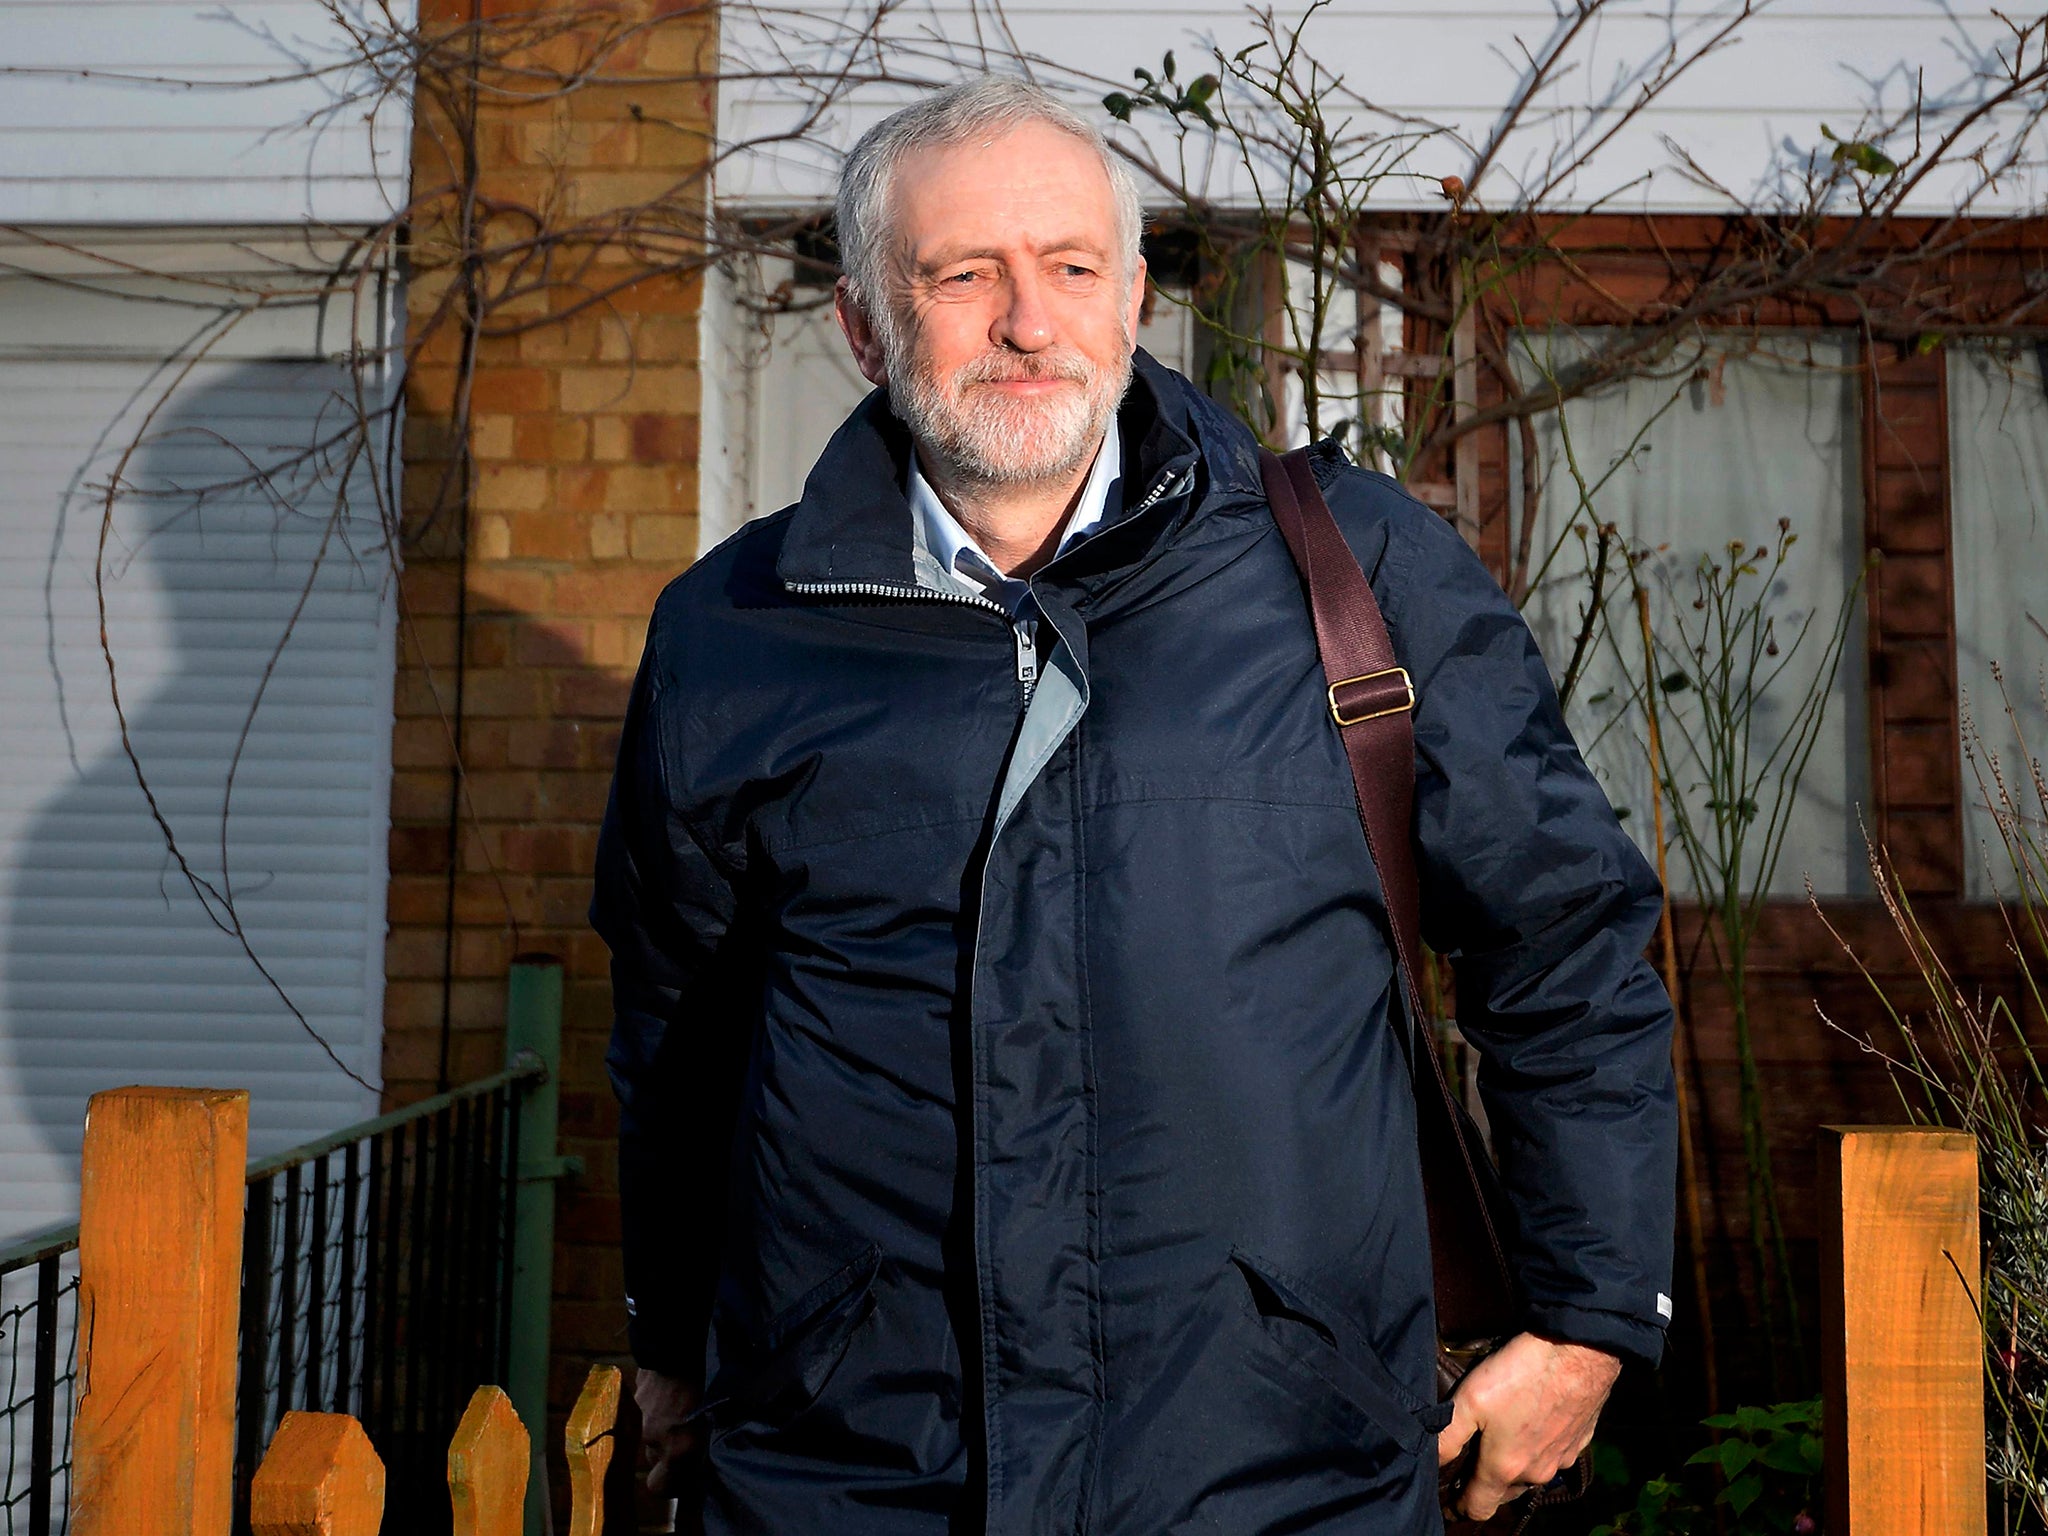 Jeremy Corbyn leaves his home in north London ahead of the reshuffle